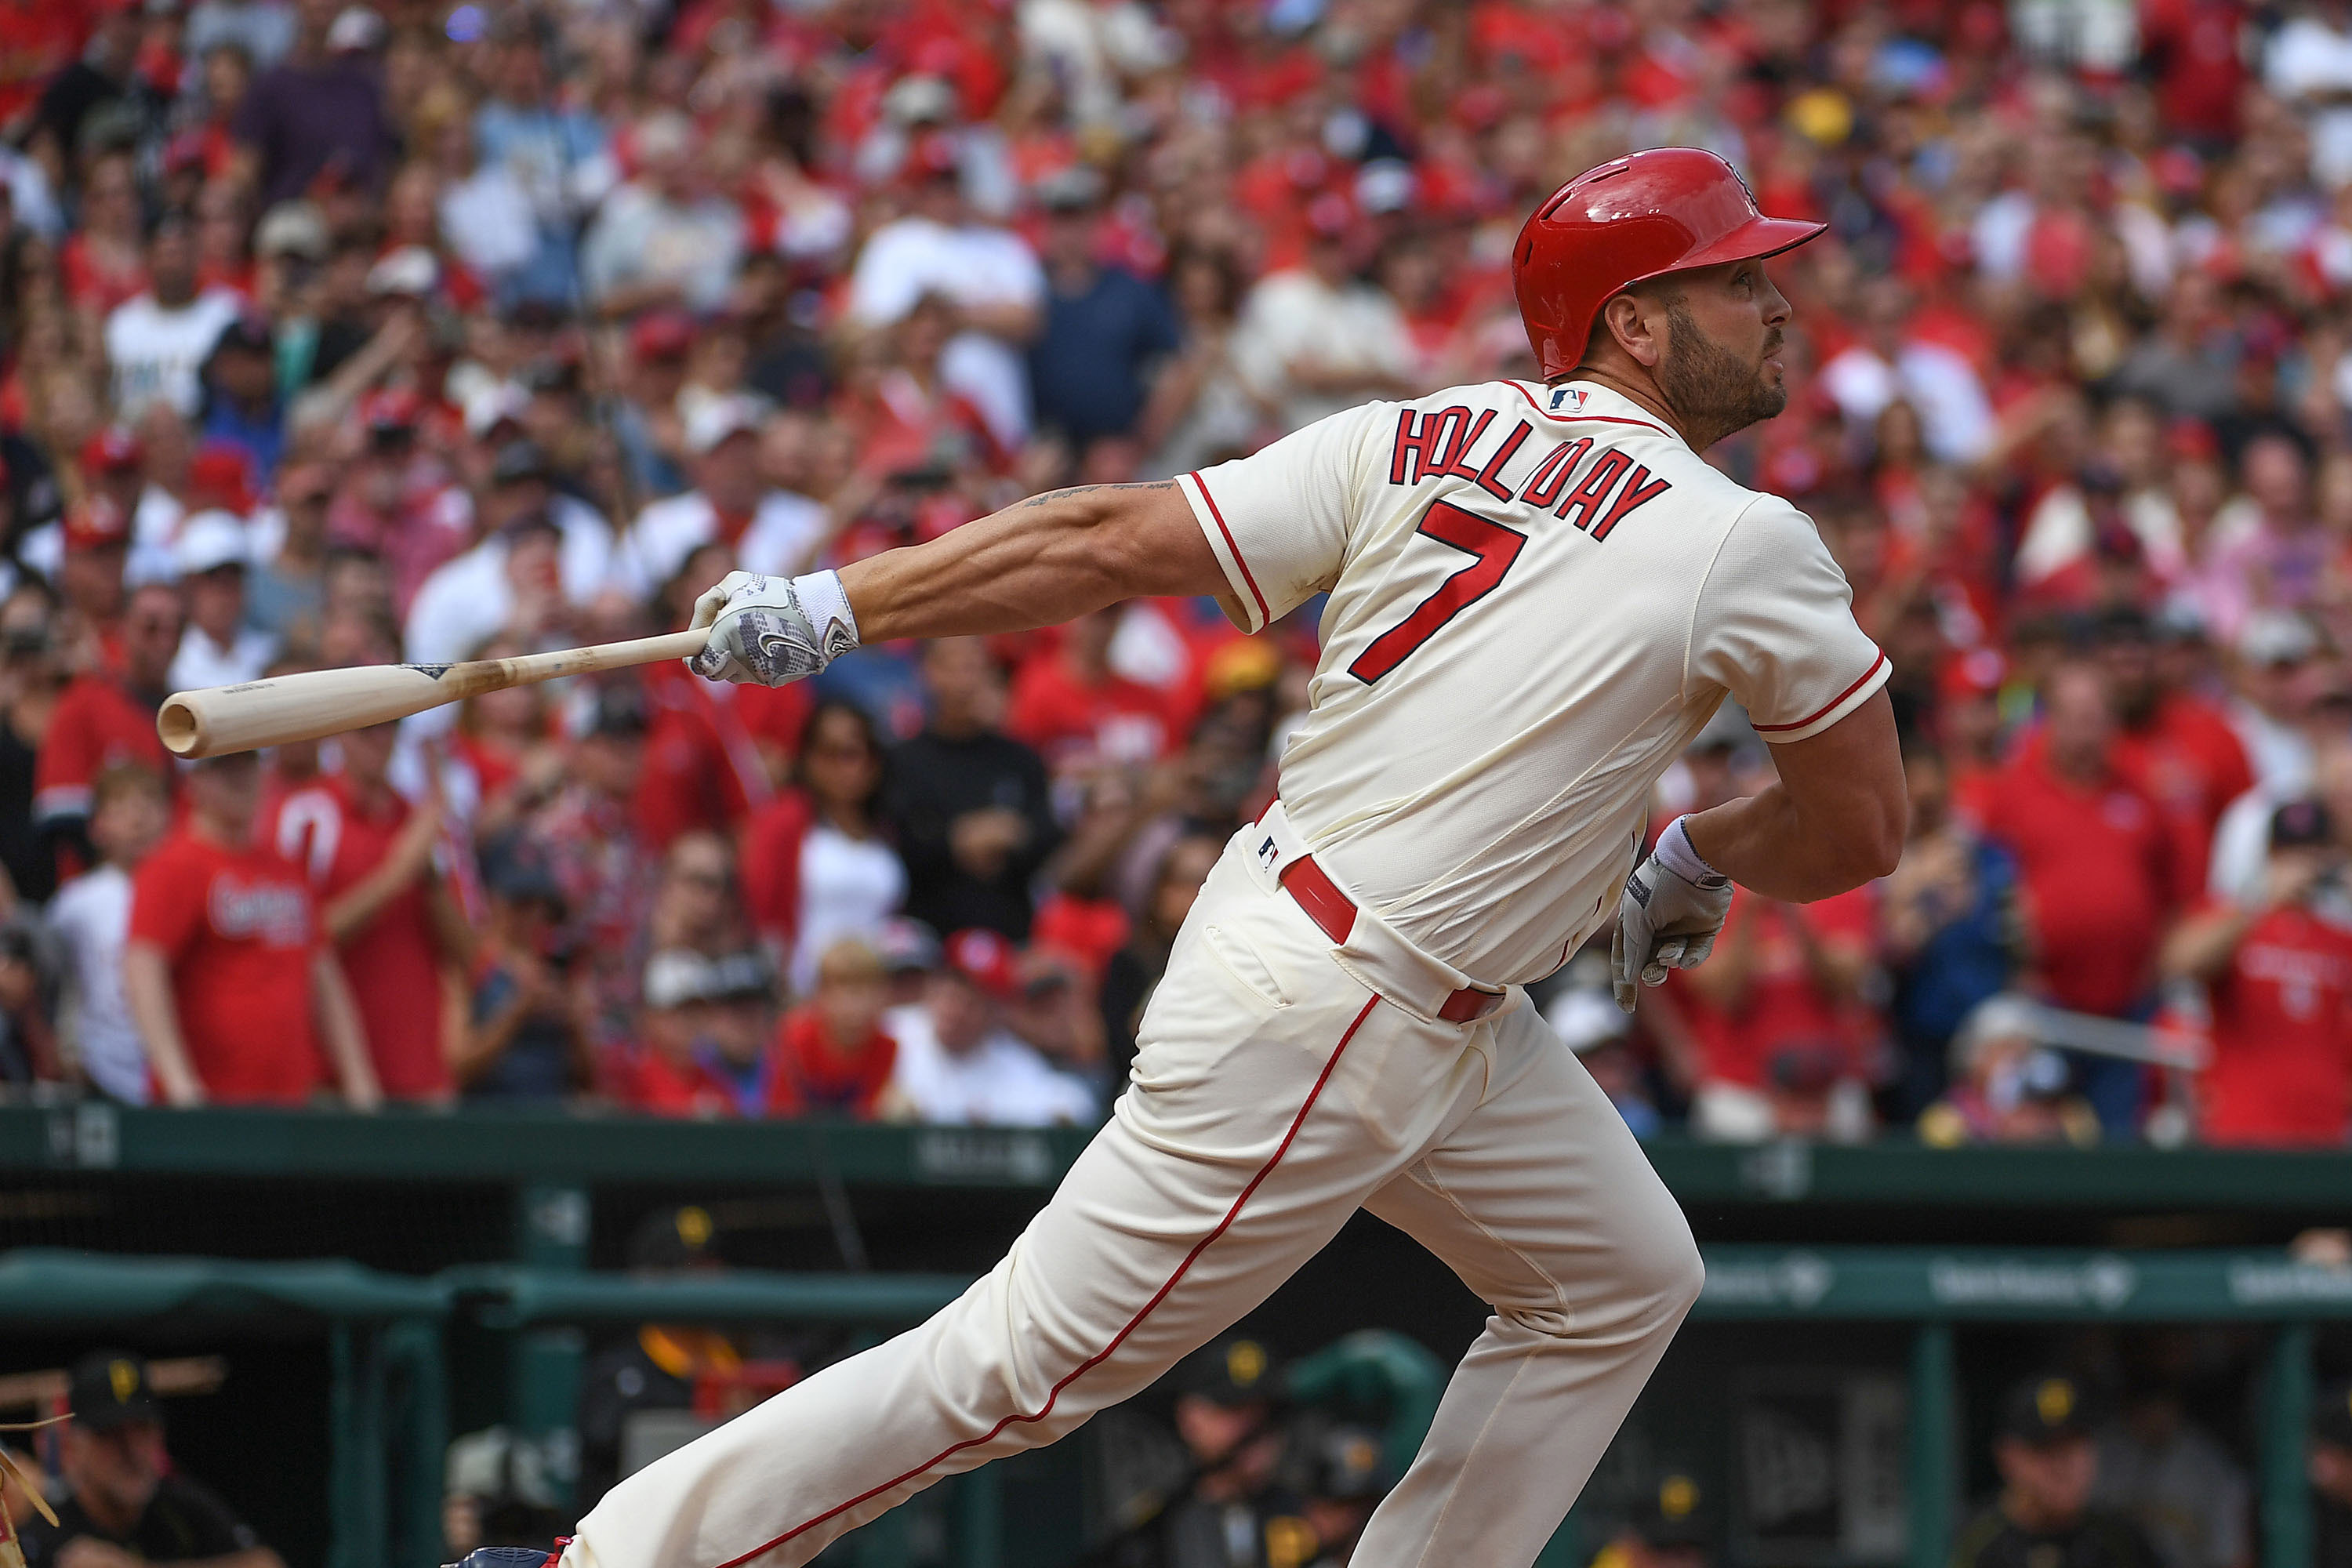 MLB® The Show™ - New Legend Matt Holliday leads-off Father's Day